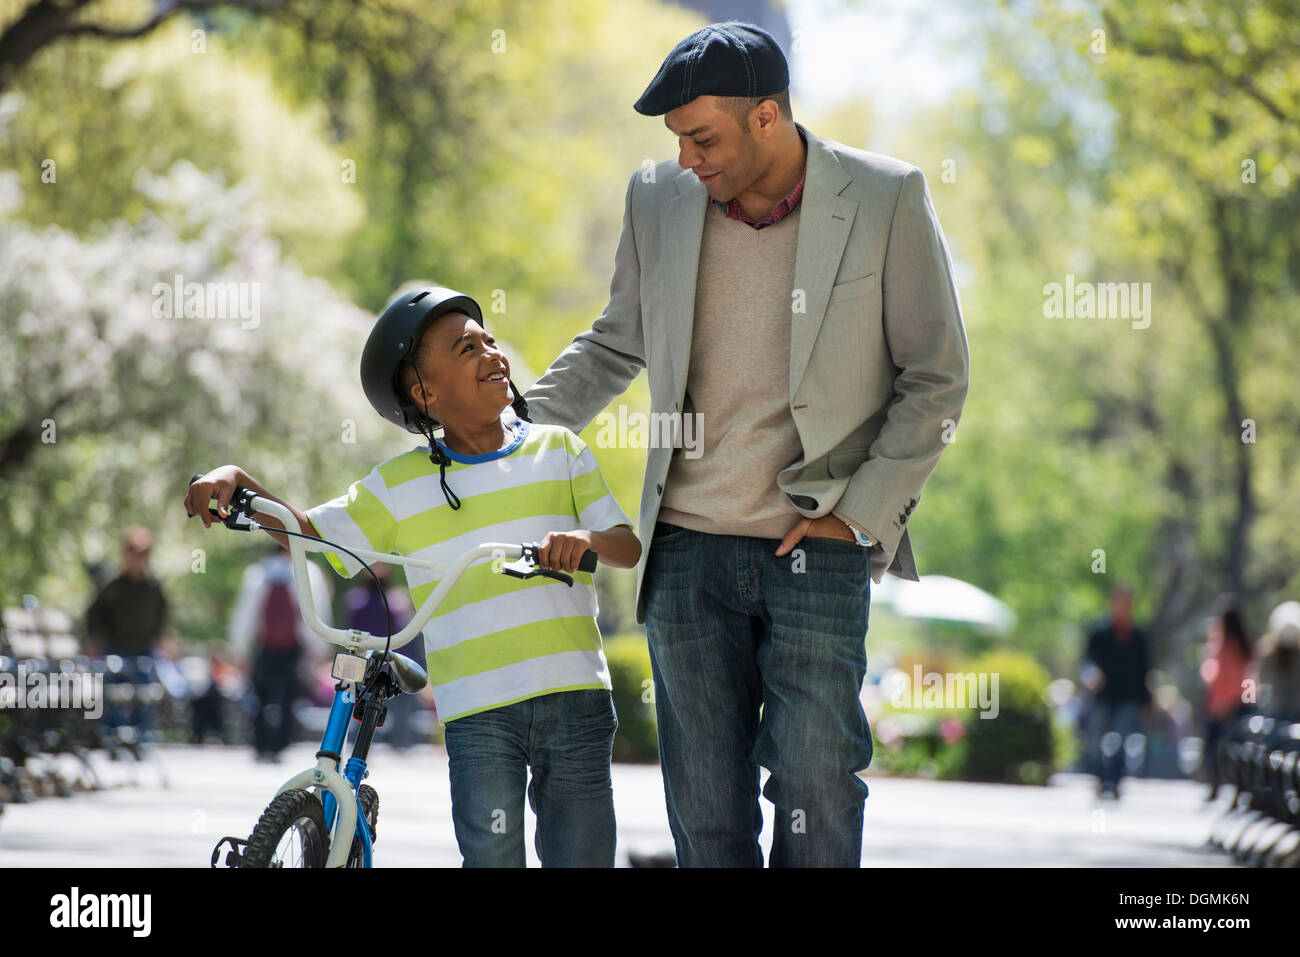 Bicycling and having fun. A father and son side by side. Stock Photo